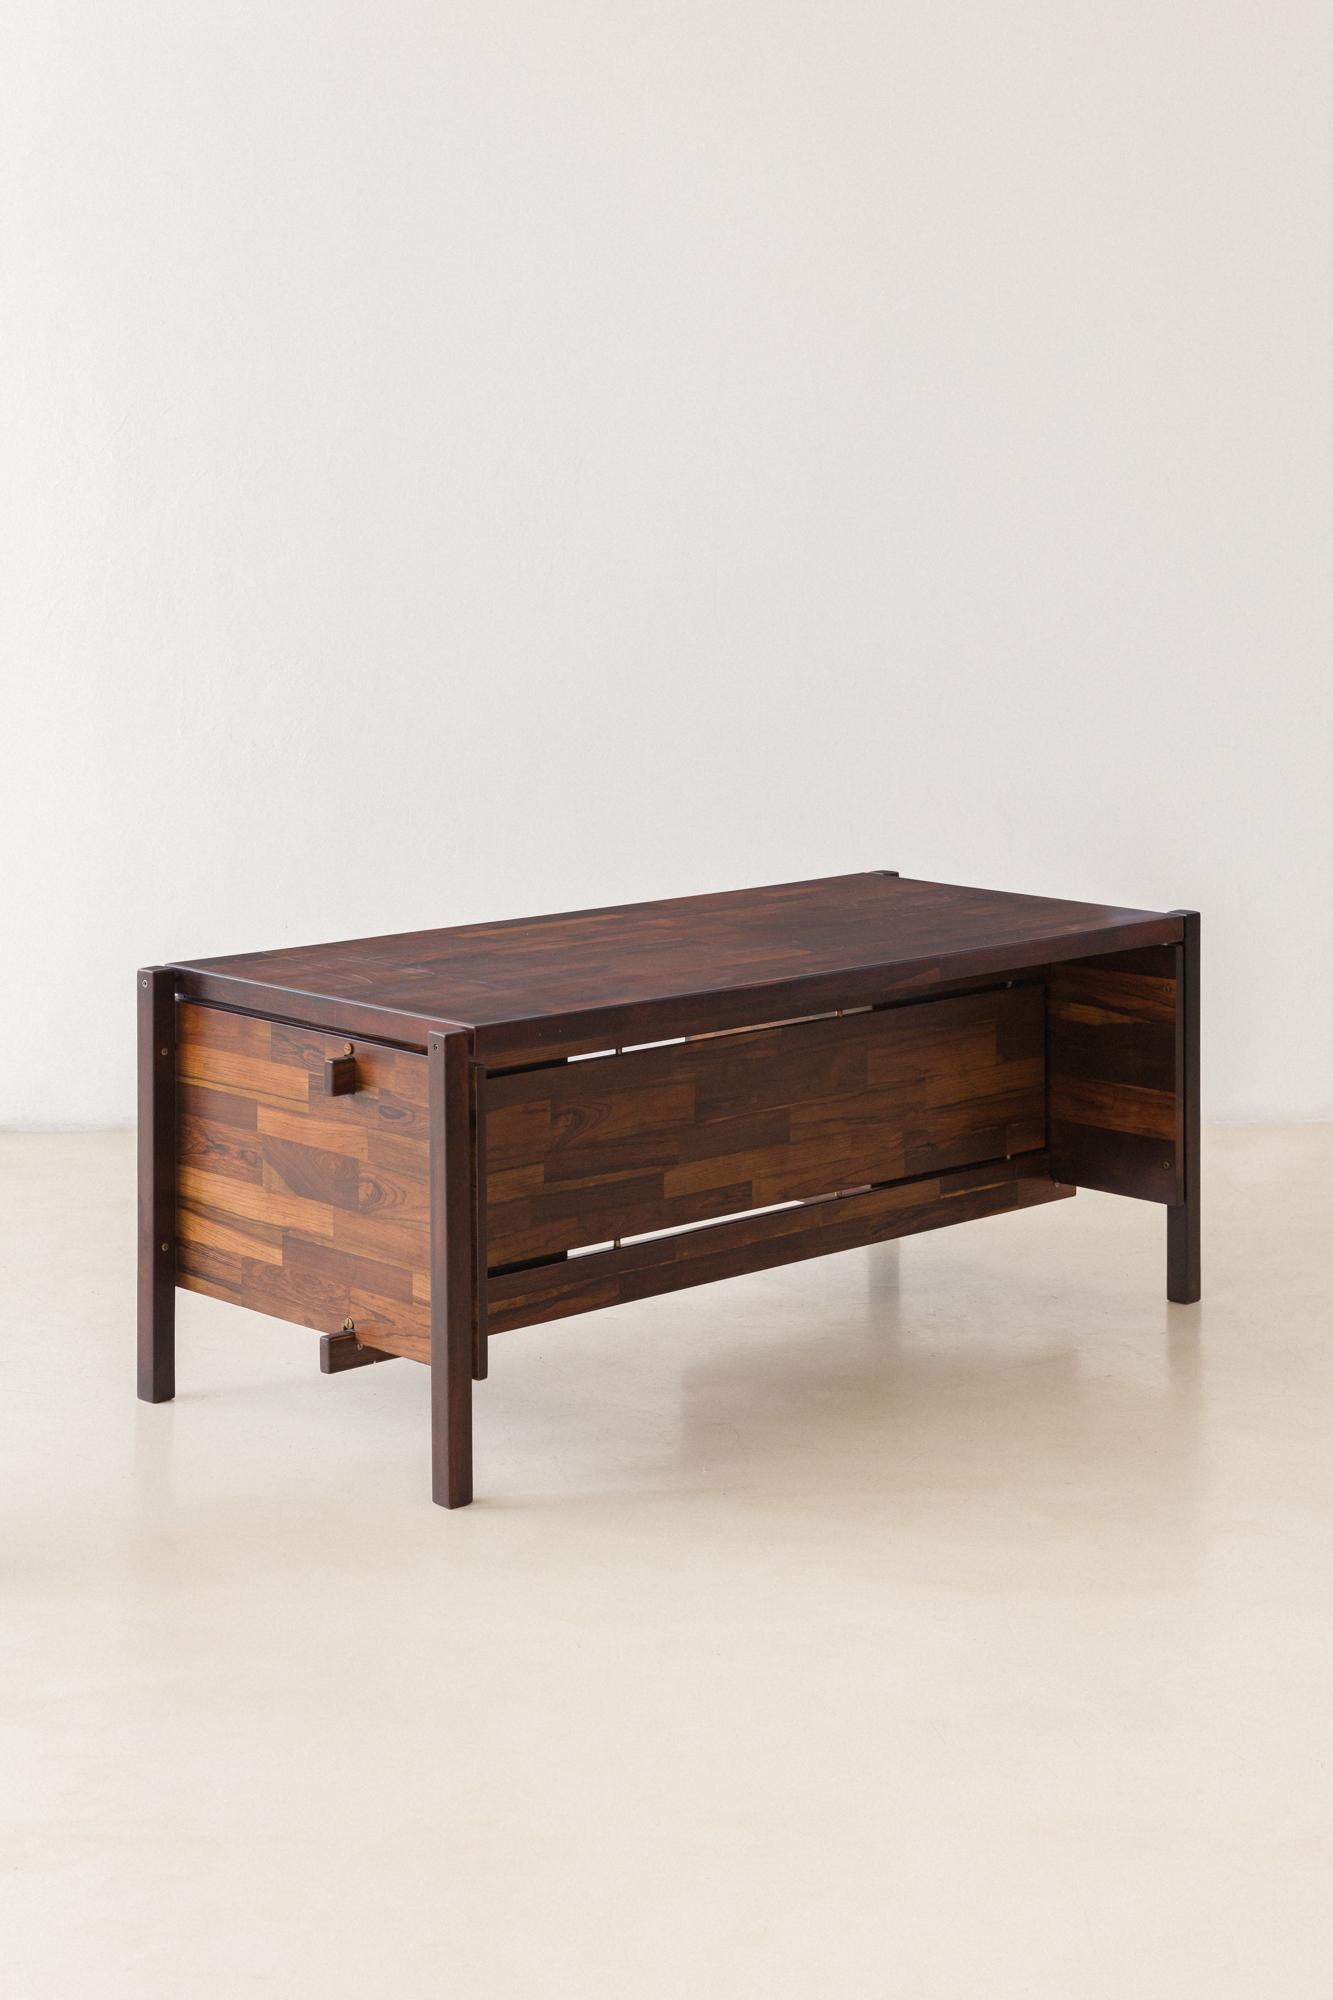 This Rosewood Desk, designed by Jorge Zalszupin (1922-2020) and manufactured by L'Atelier in the 1960s, is a great way to have the diversity of different tones of Rosewood in just one piece.

Zalszupin's work as a designer, entrepreneur, and manager